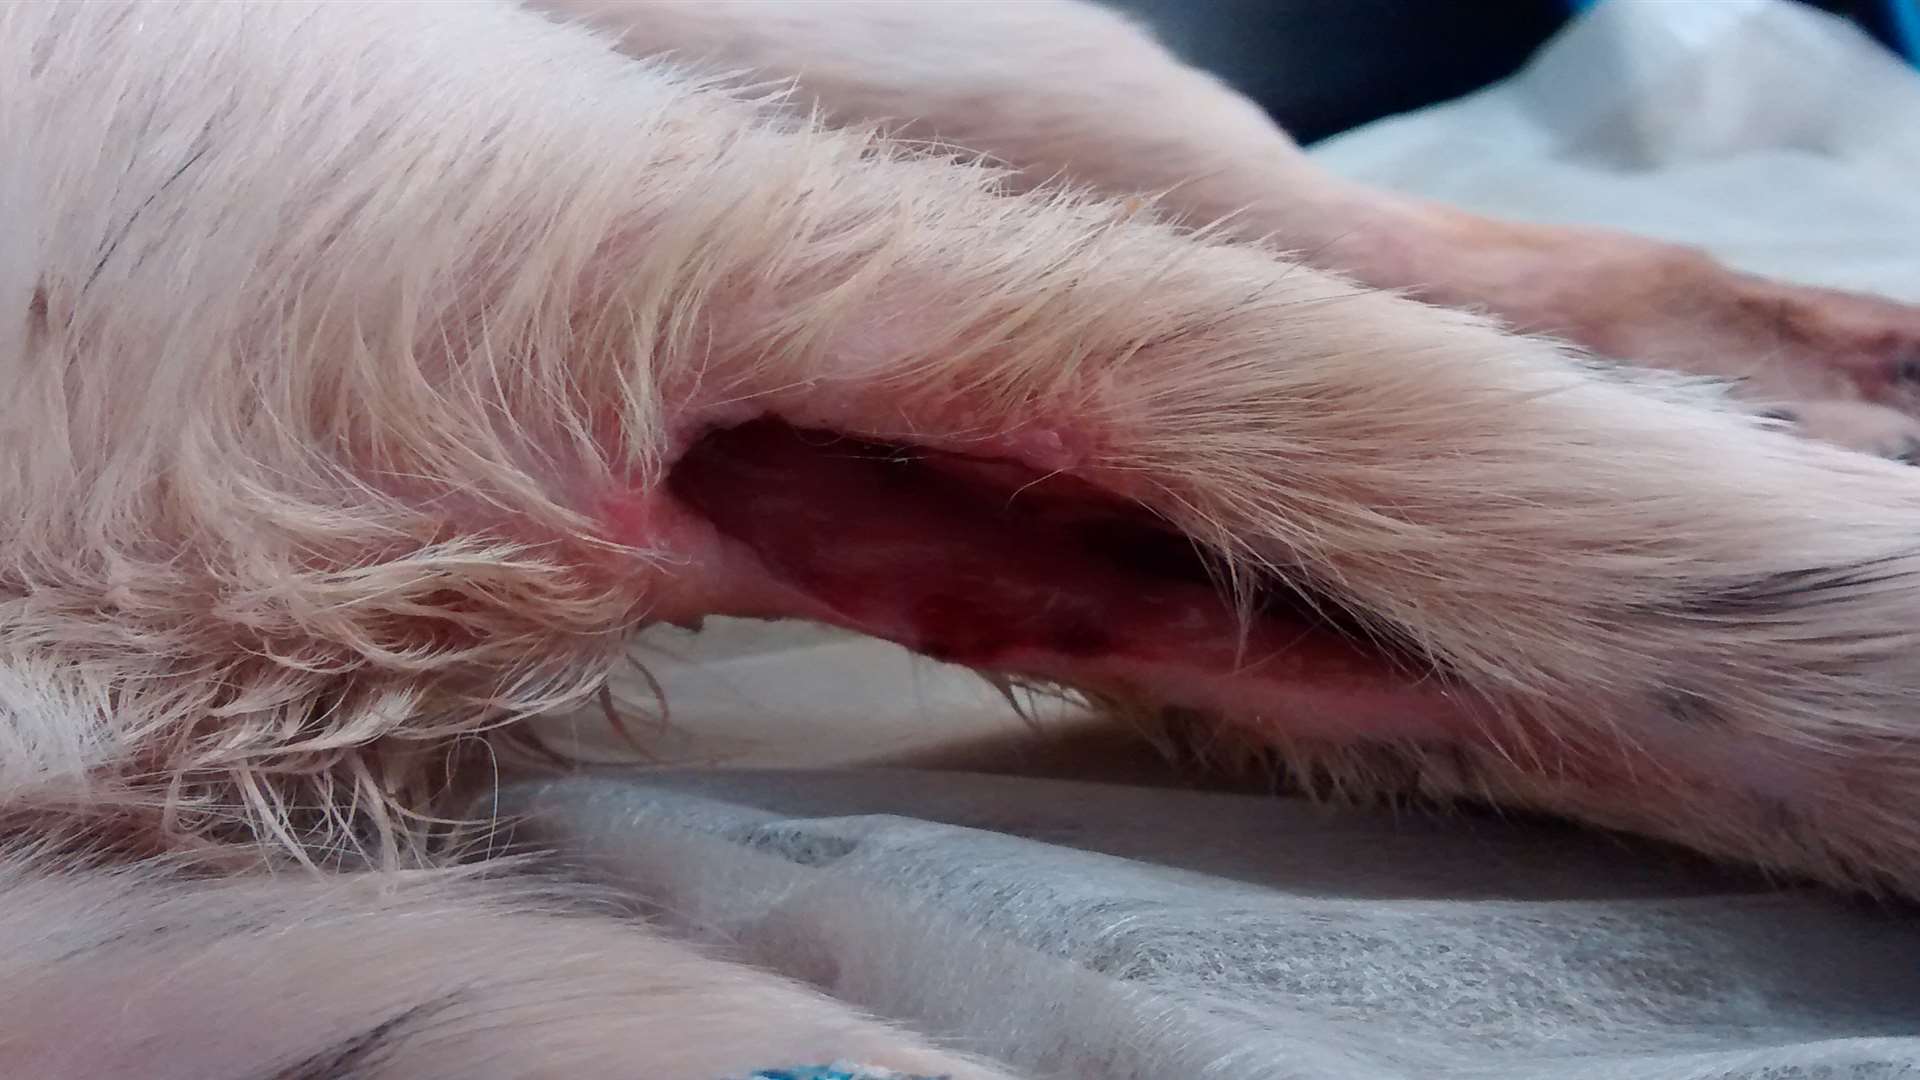 The dog was found covered in wounds and investigators believe her claws were forcibly removed. Picture: RSPCA